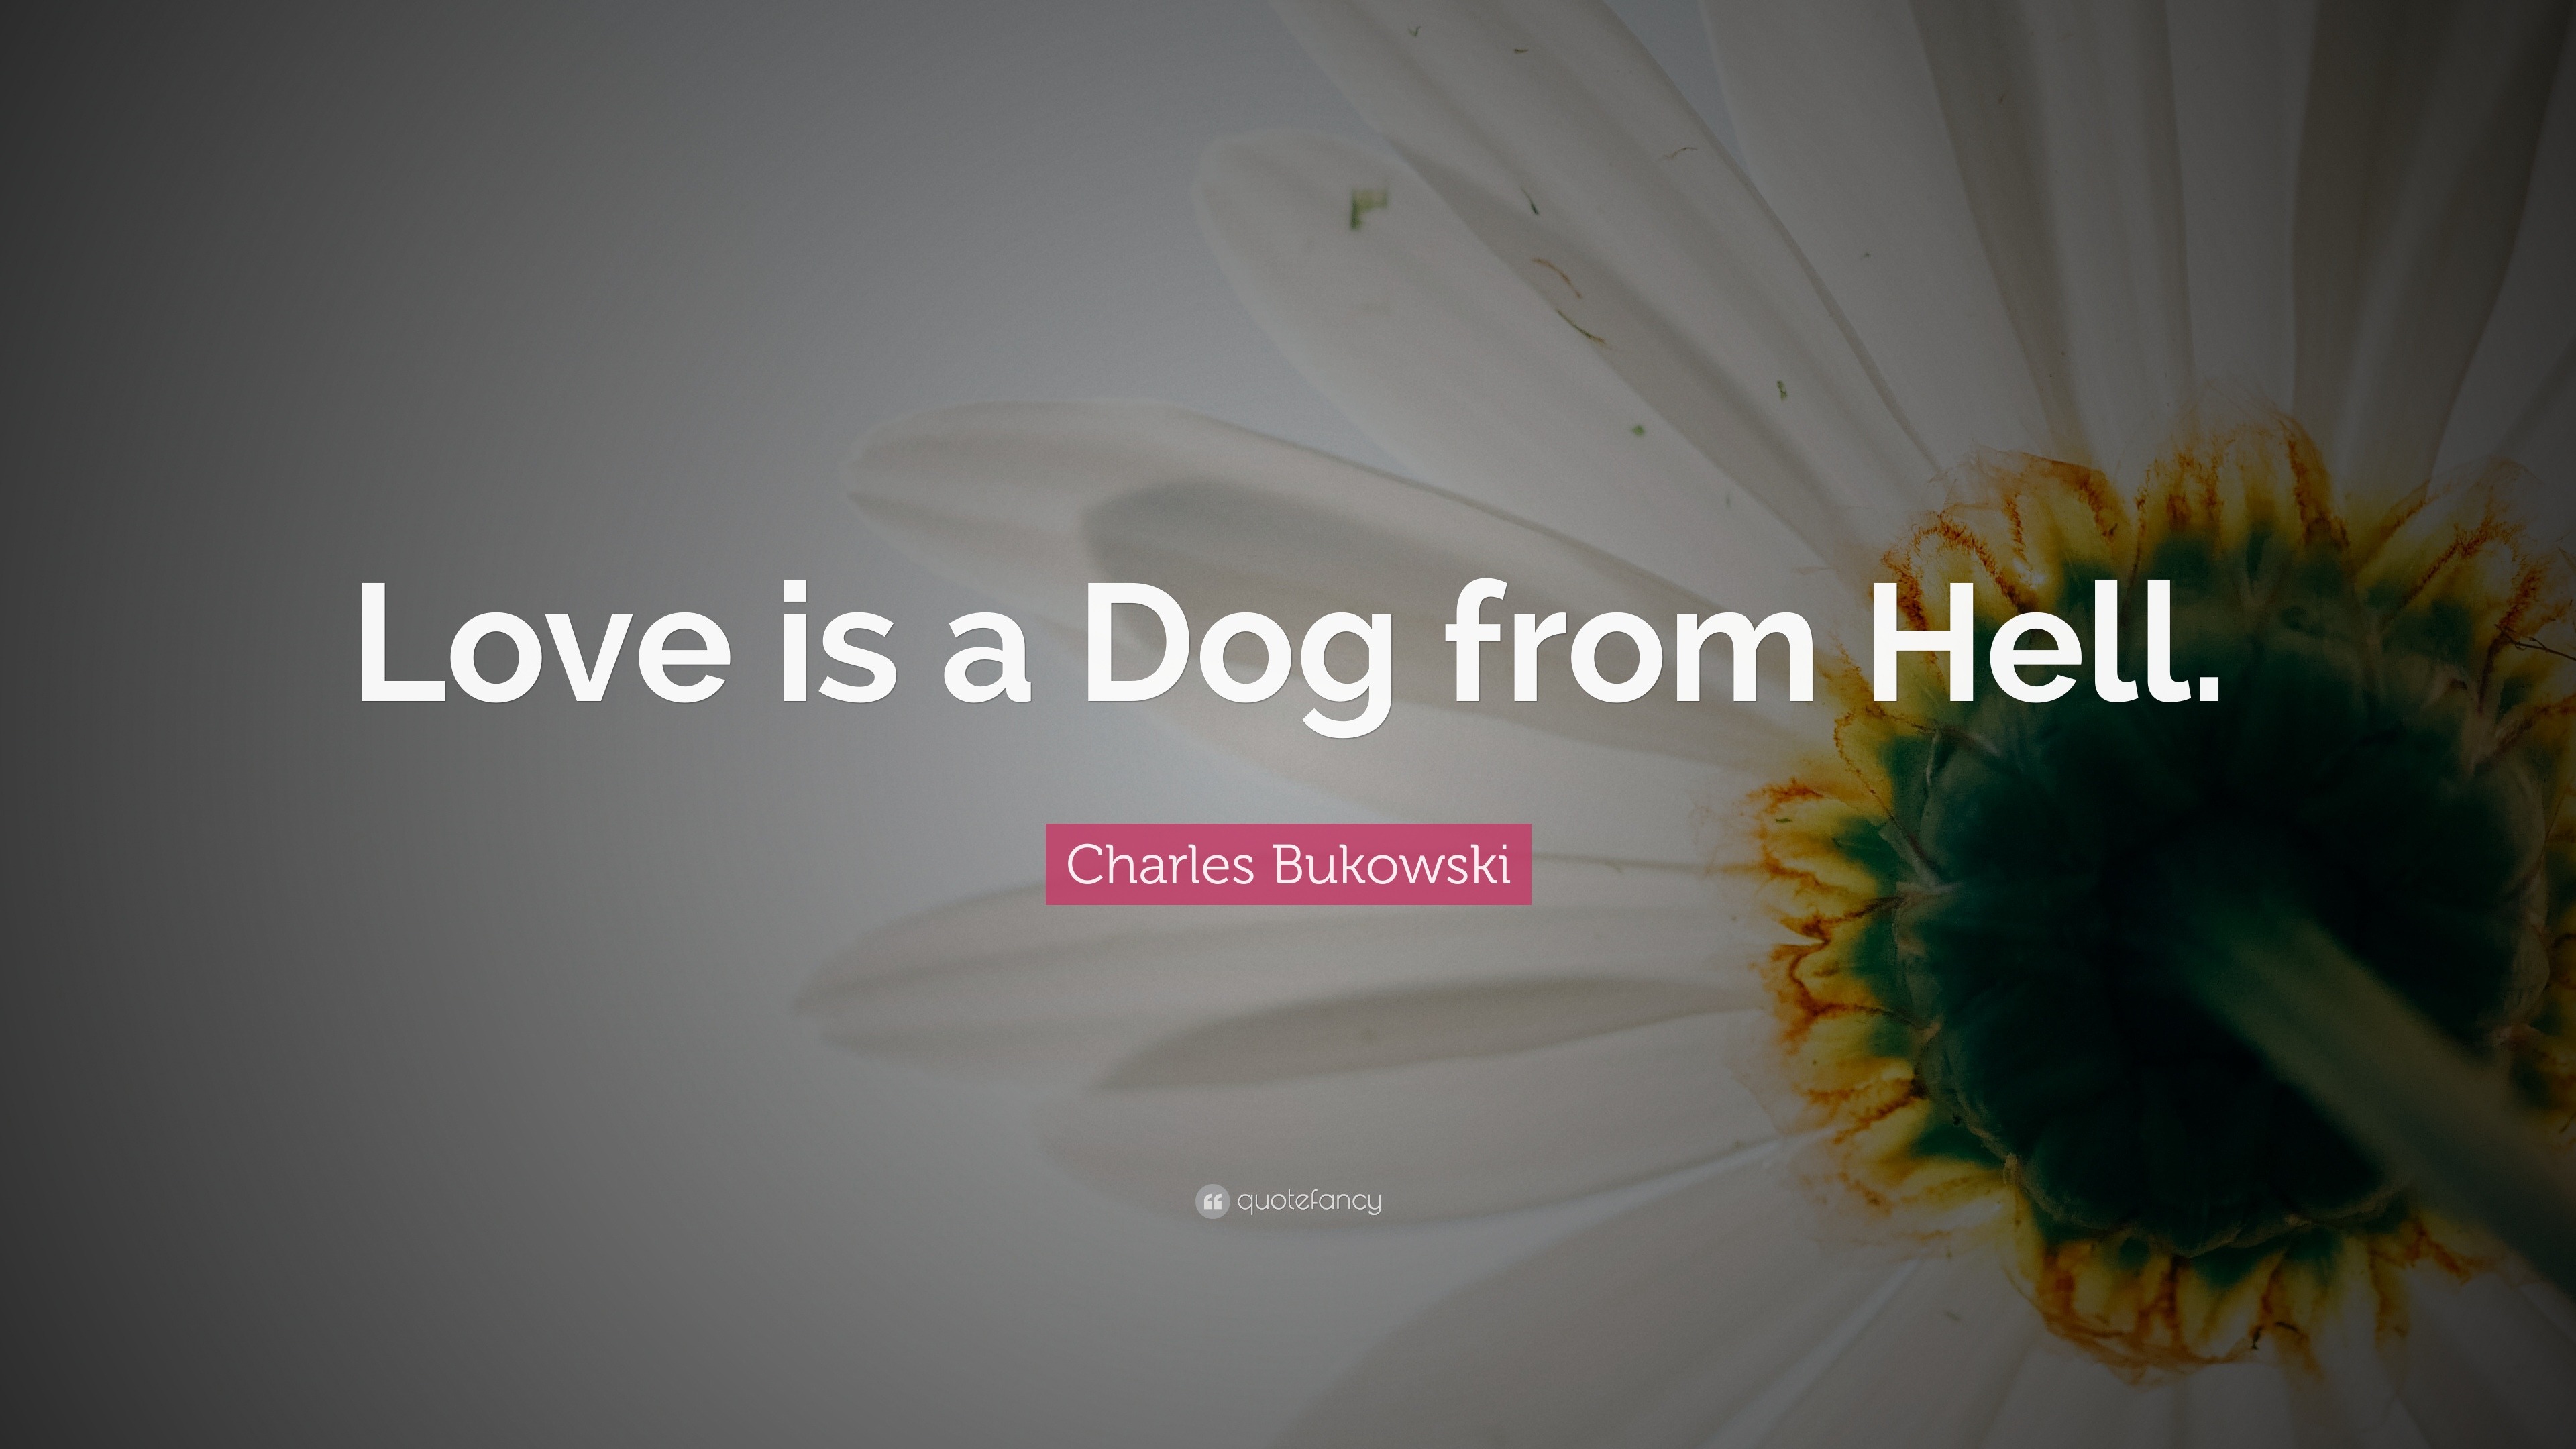 Charles Bukowski Quote “Love is a Dog from Hell ”